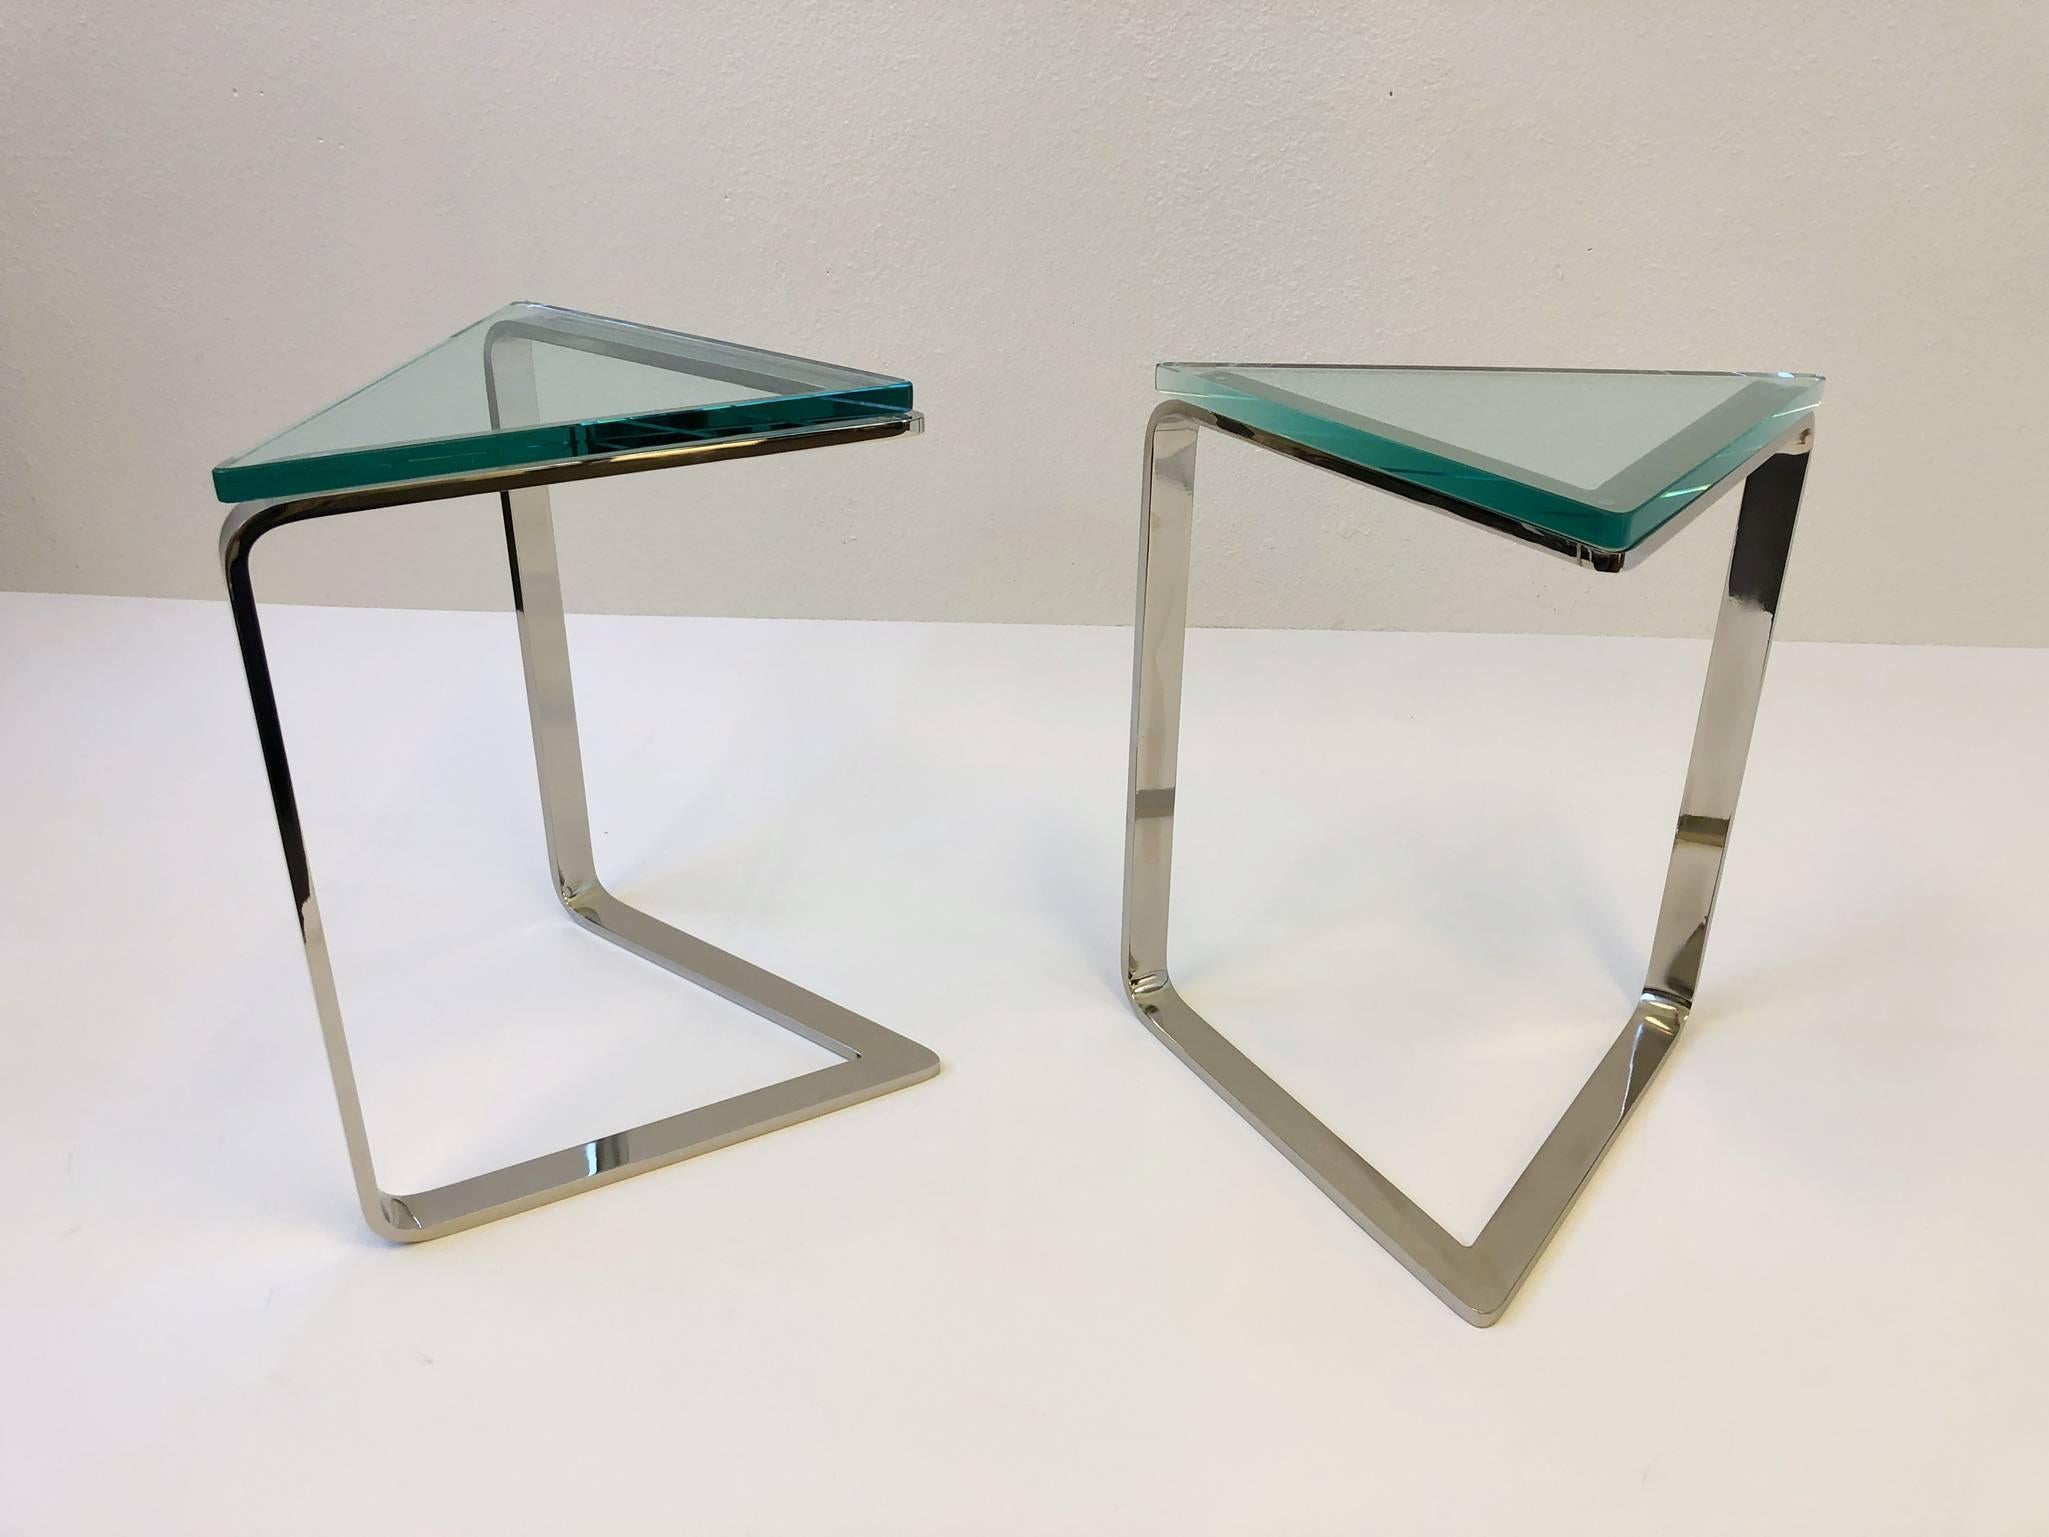 A spectacular pair of occasional tables that are triangular shape. The tables are constructed of solid steel and a 3/4” thick glass top.
The tables have been newly professionally polished and new glass tops.
Dimensions: 20.75” high, 18” wide and